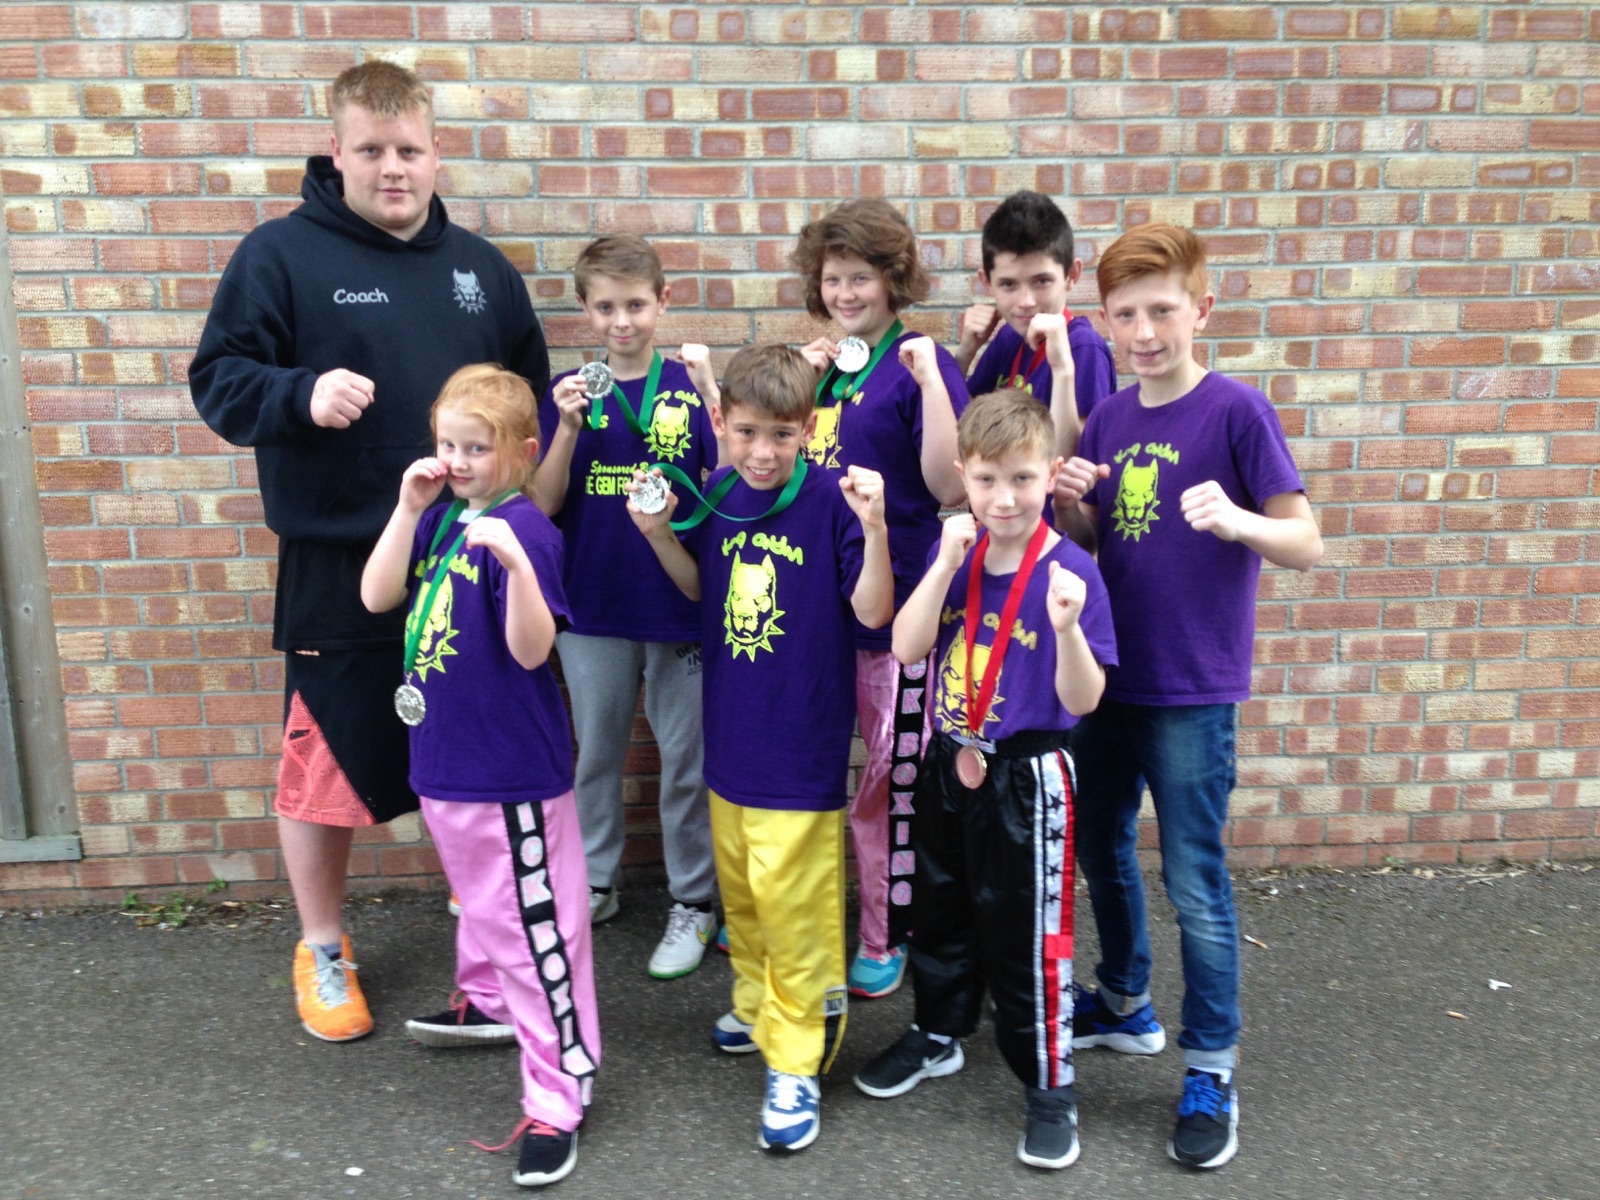 K.9 fighters who competed in Kent and Bury